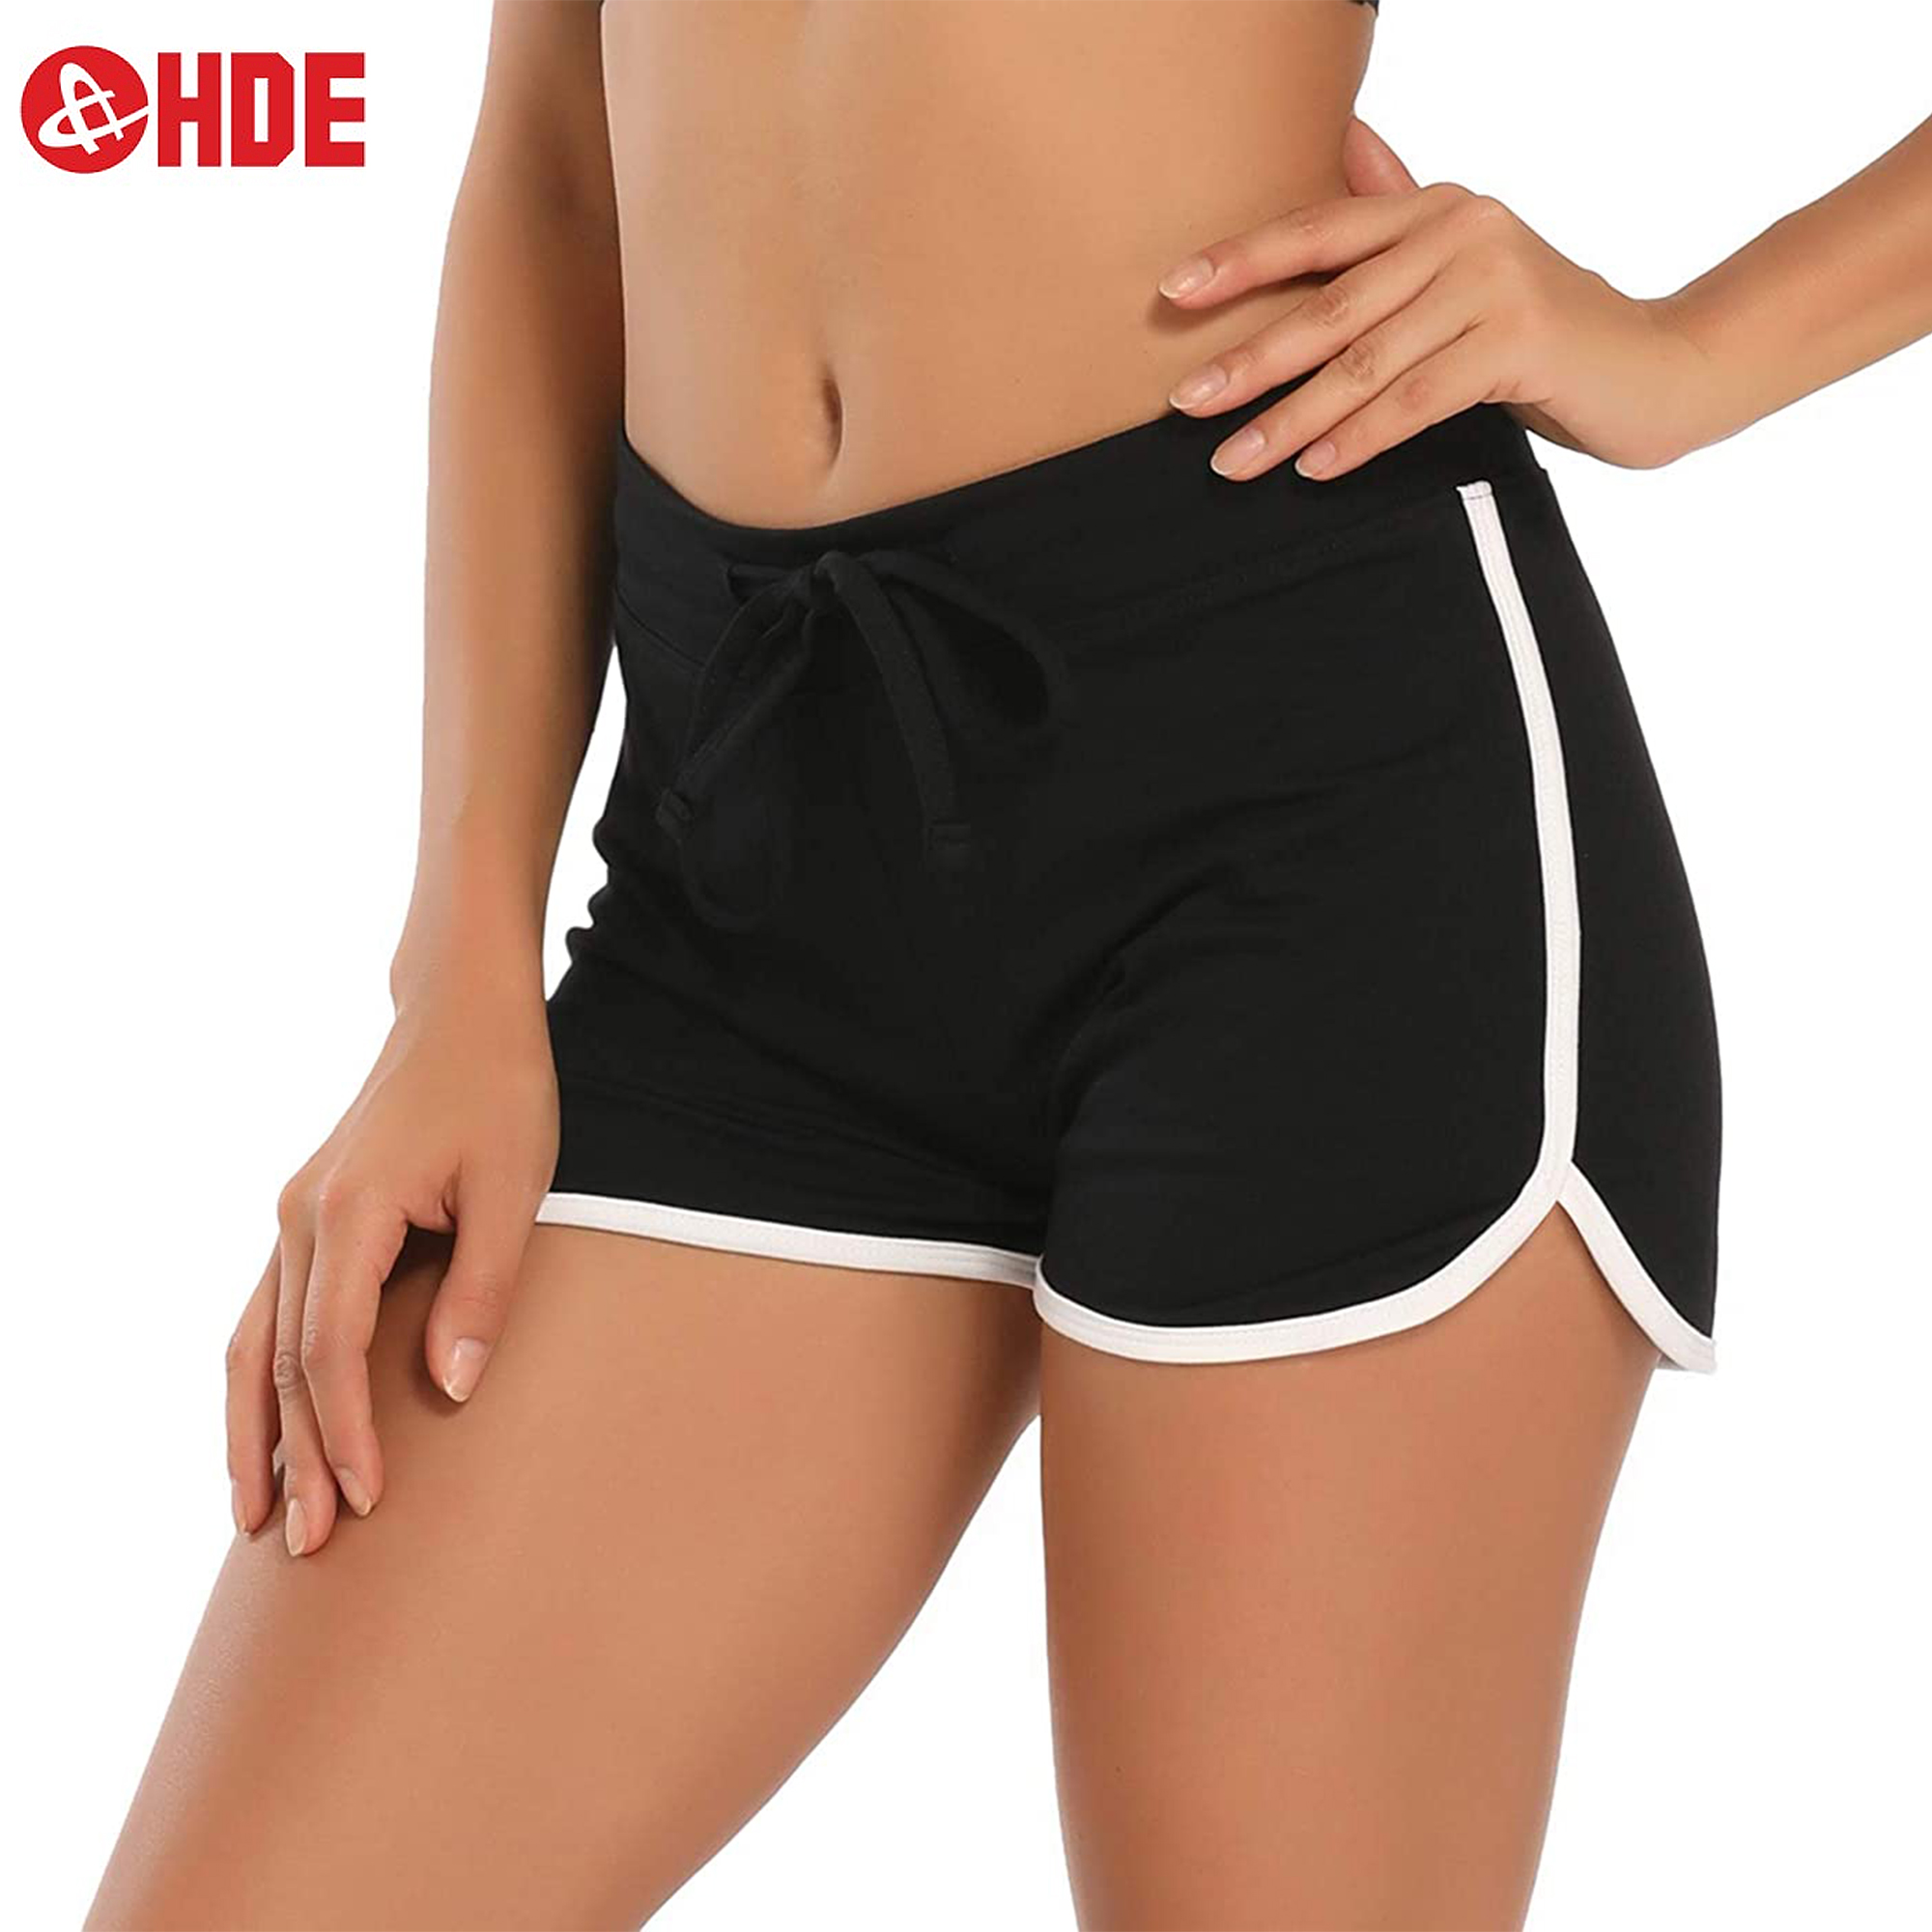 HDE Women Dolphin Shorts Running Workout Clothes Black Small - image 2 of 9